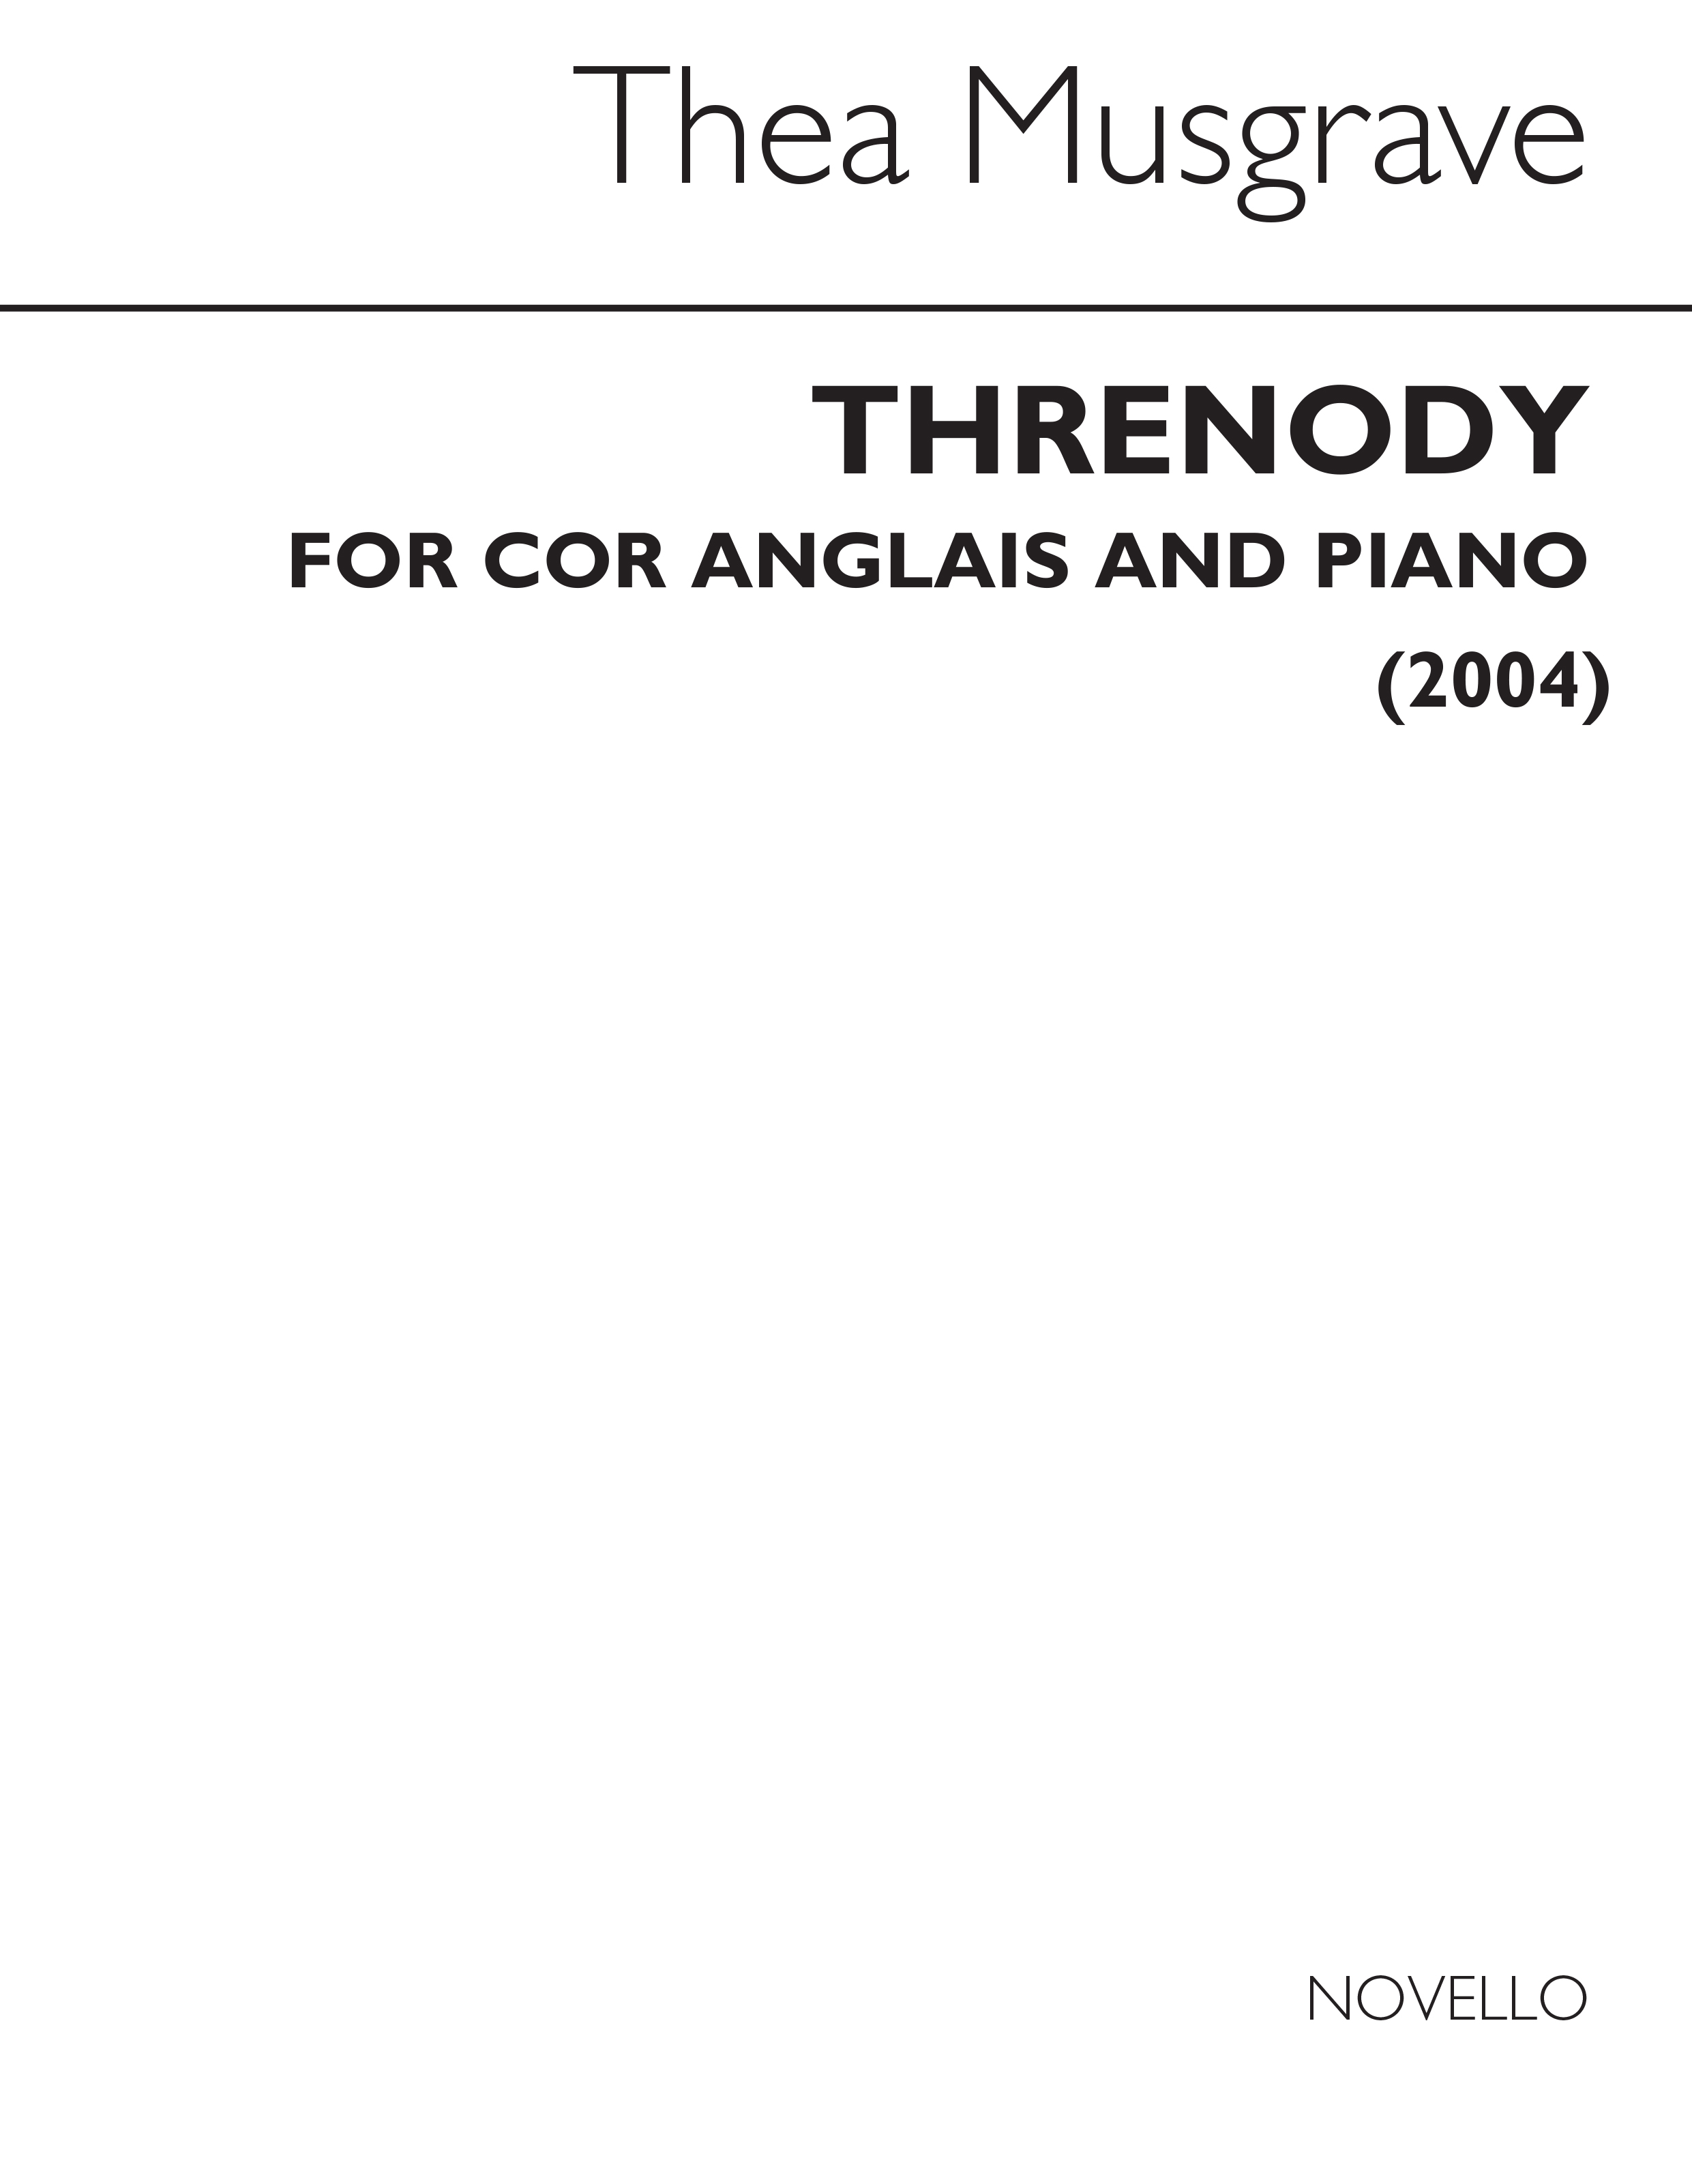 Thea Musgrave: Threnody For Cor Anglais And Piano